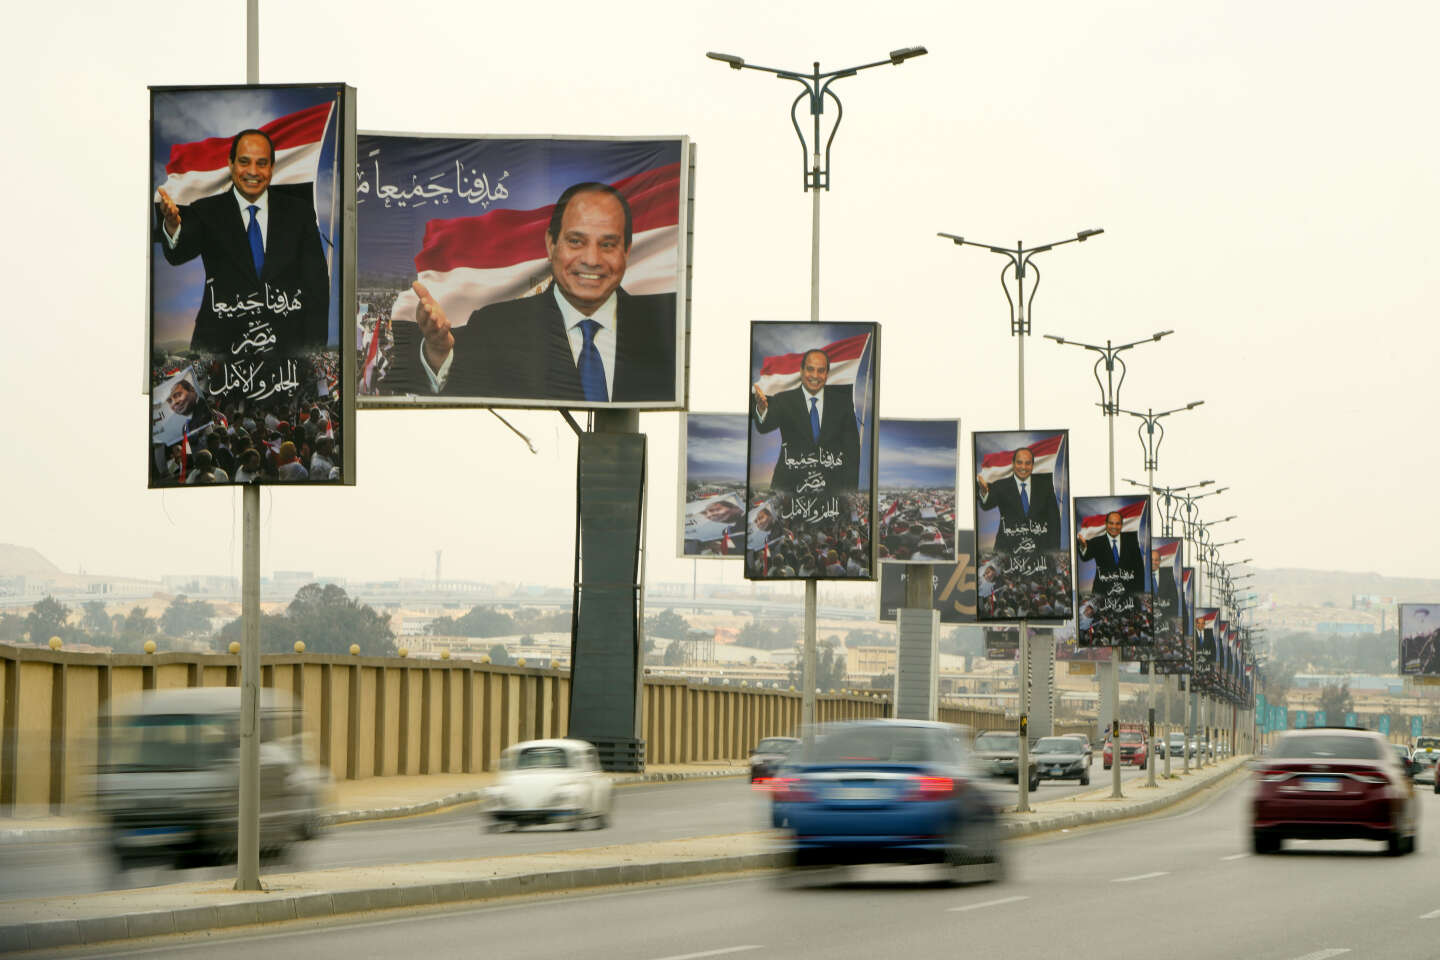 In Egypt, Marshal Sisi’s dreams of grandeur dashed by the reality of a bankrupt economy